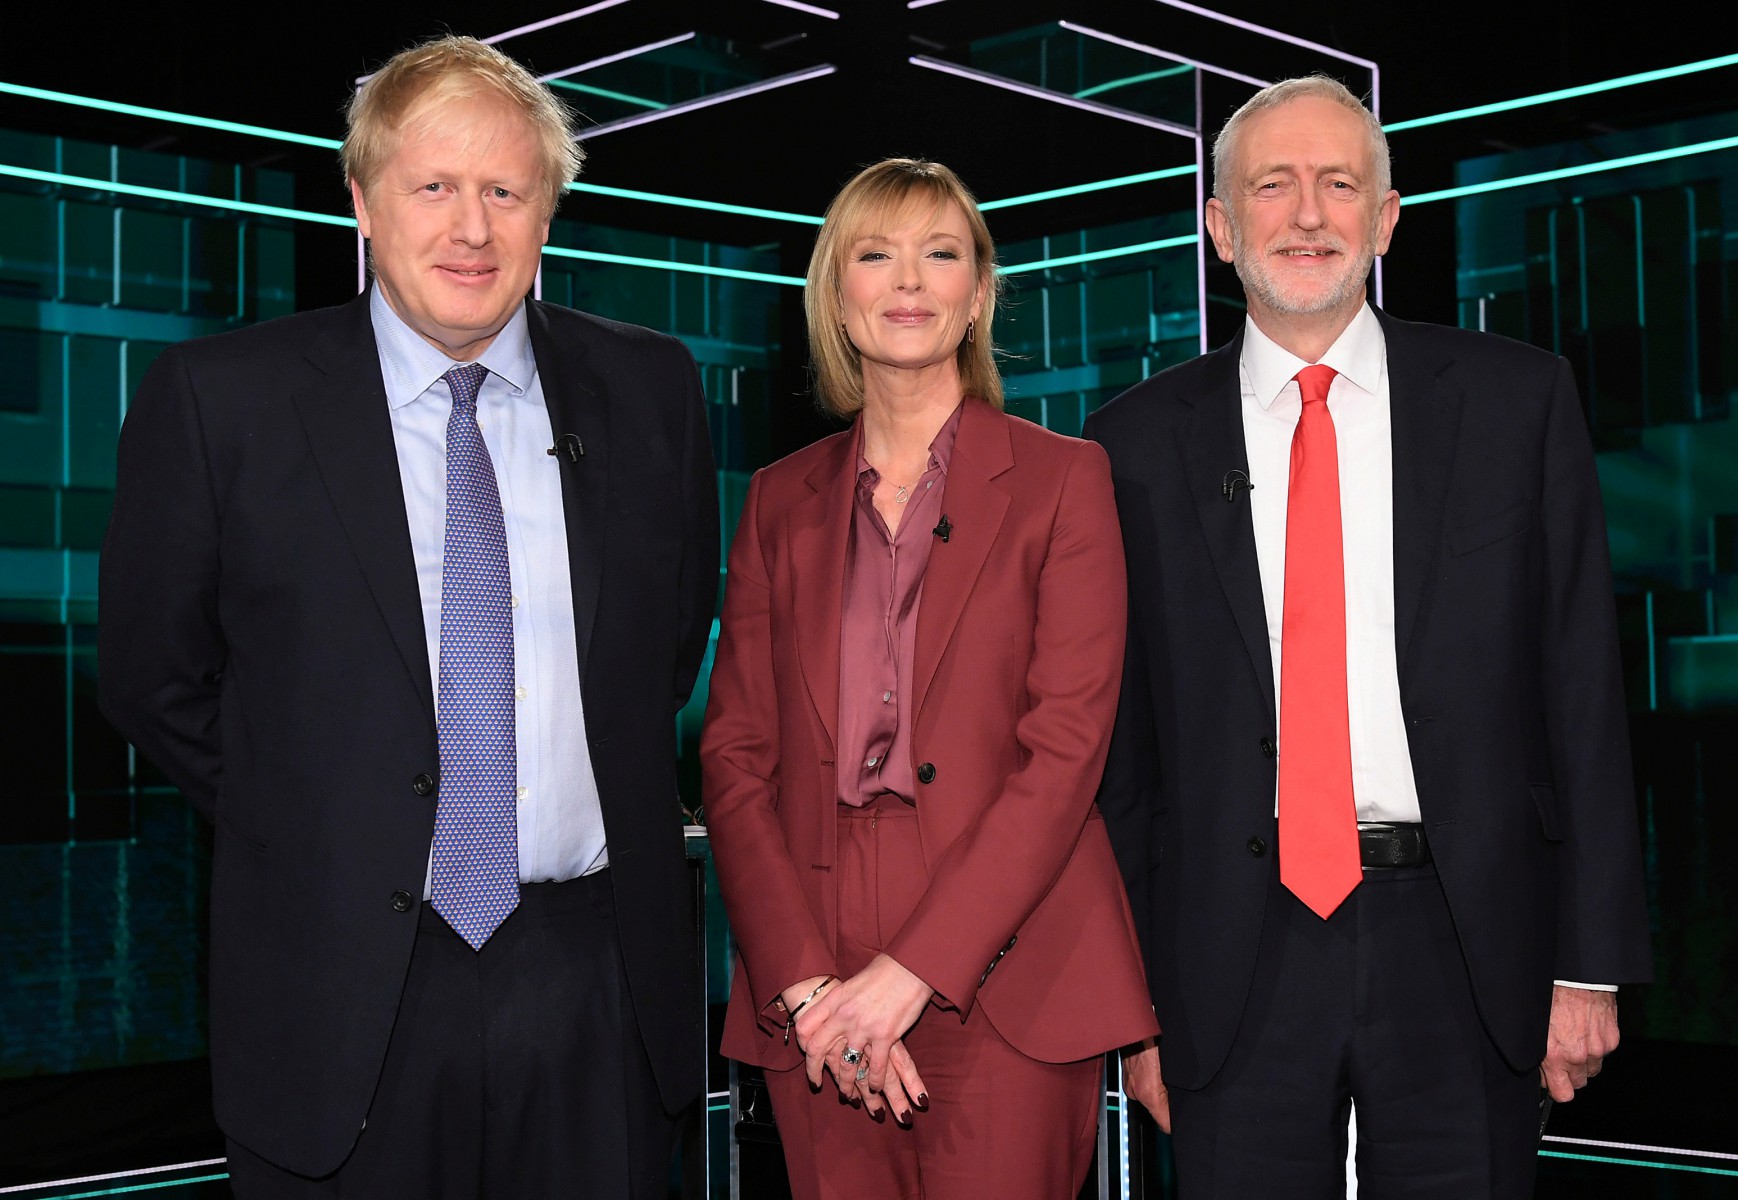 The leaders posed with ITV host Julie Etchingham before the big clash